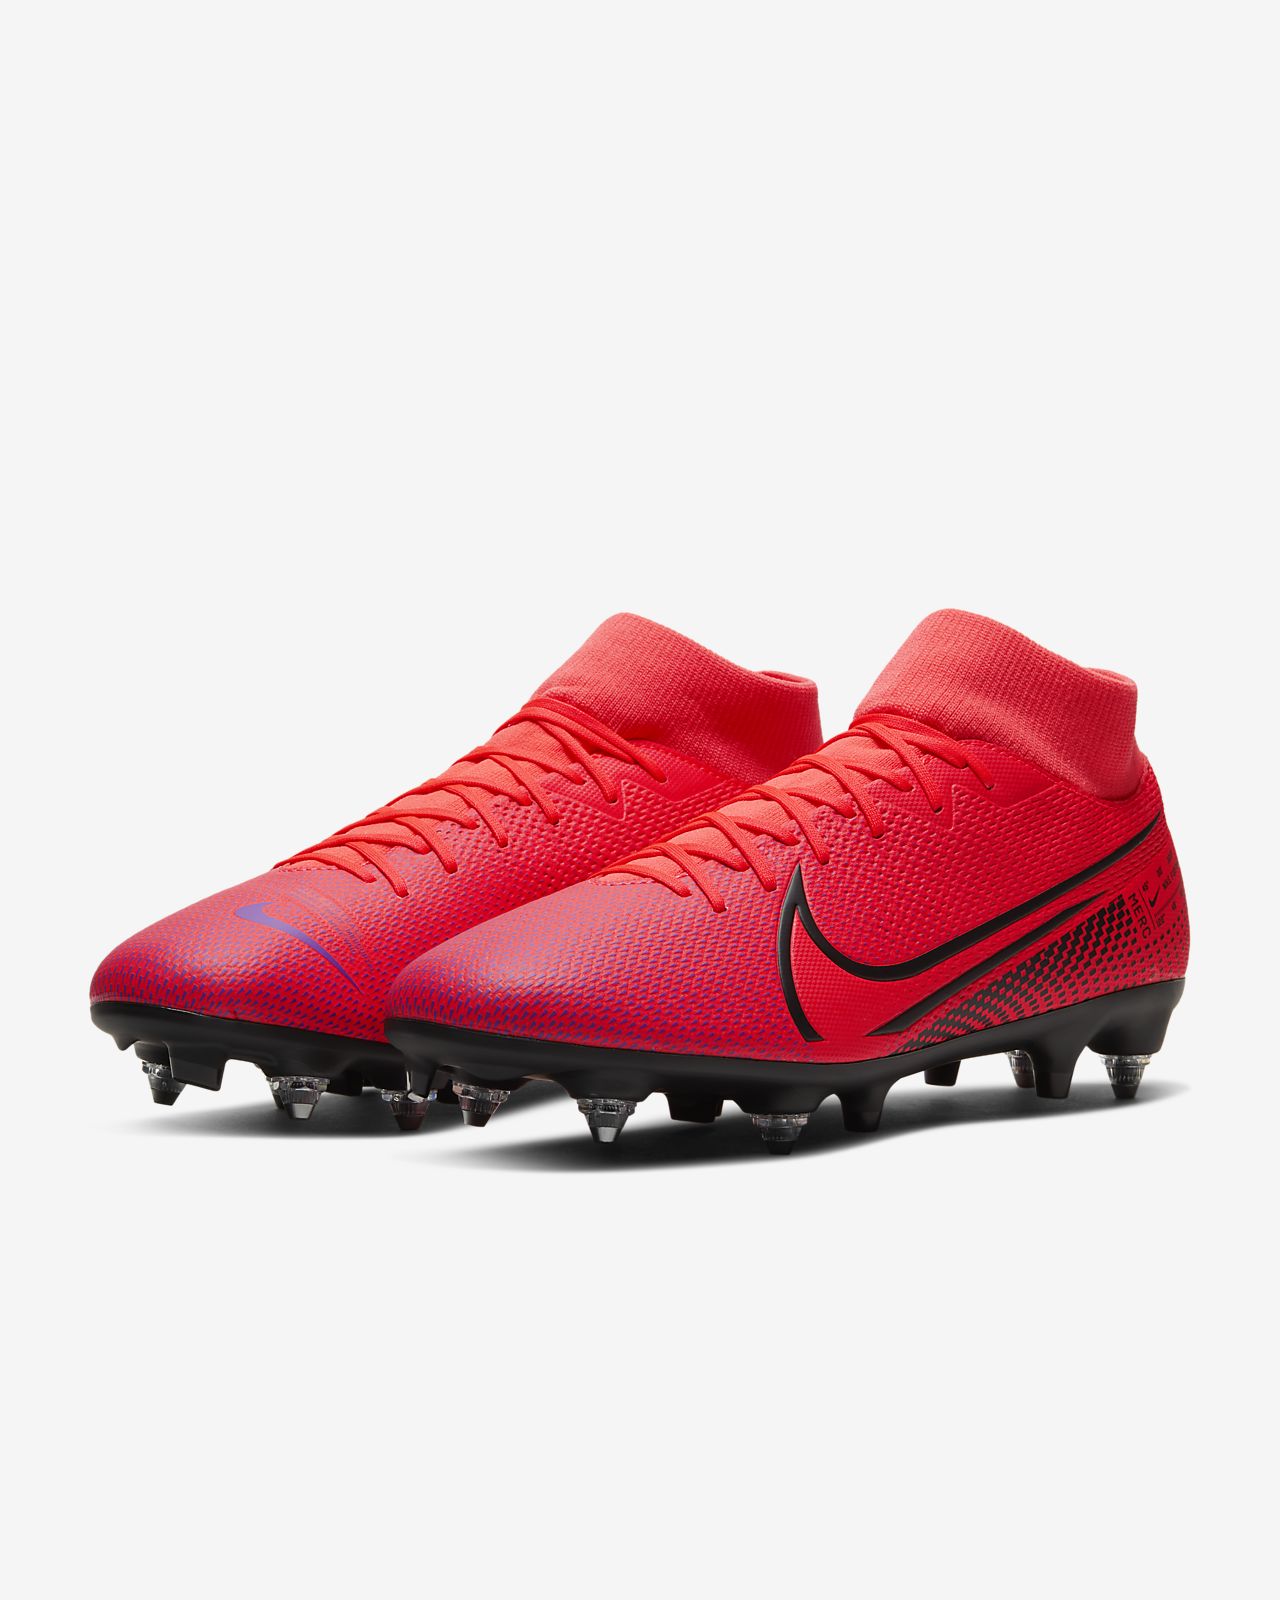 Shoes Nike JR Superfly 6 Academy GS TF Black price 57.